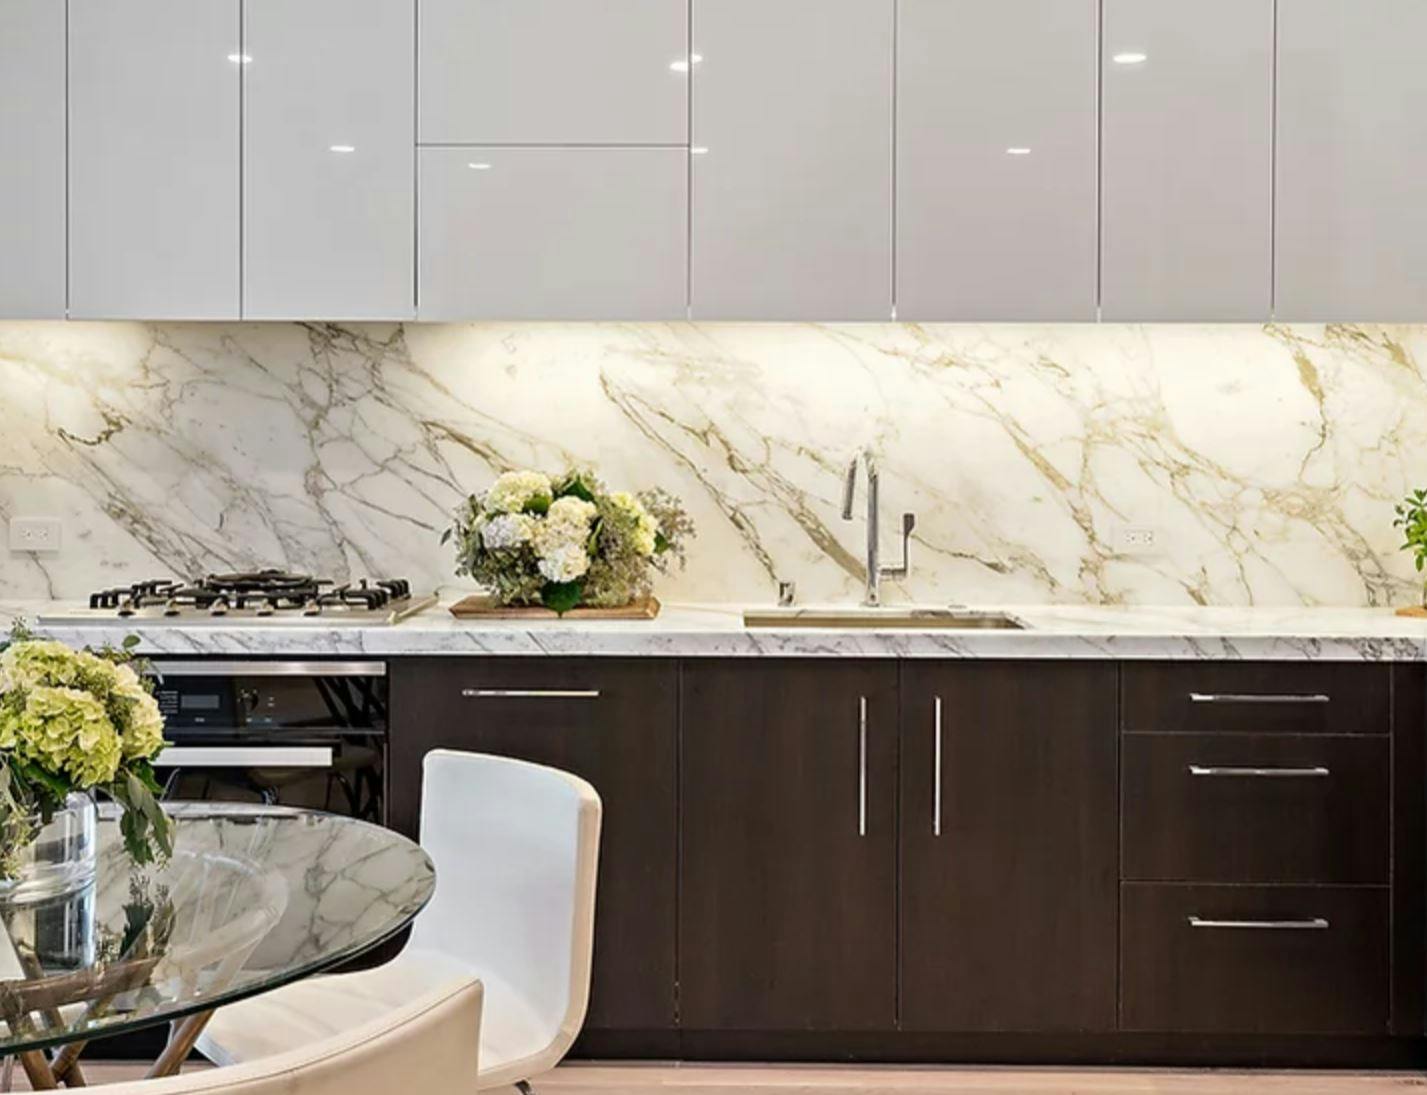 With custom cabinetry and marble countertops, the Murano provides a gourmet kitchen experience that is equally sleek and elegant in appearance. 